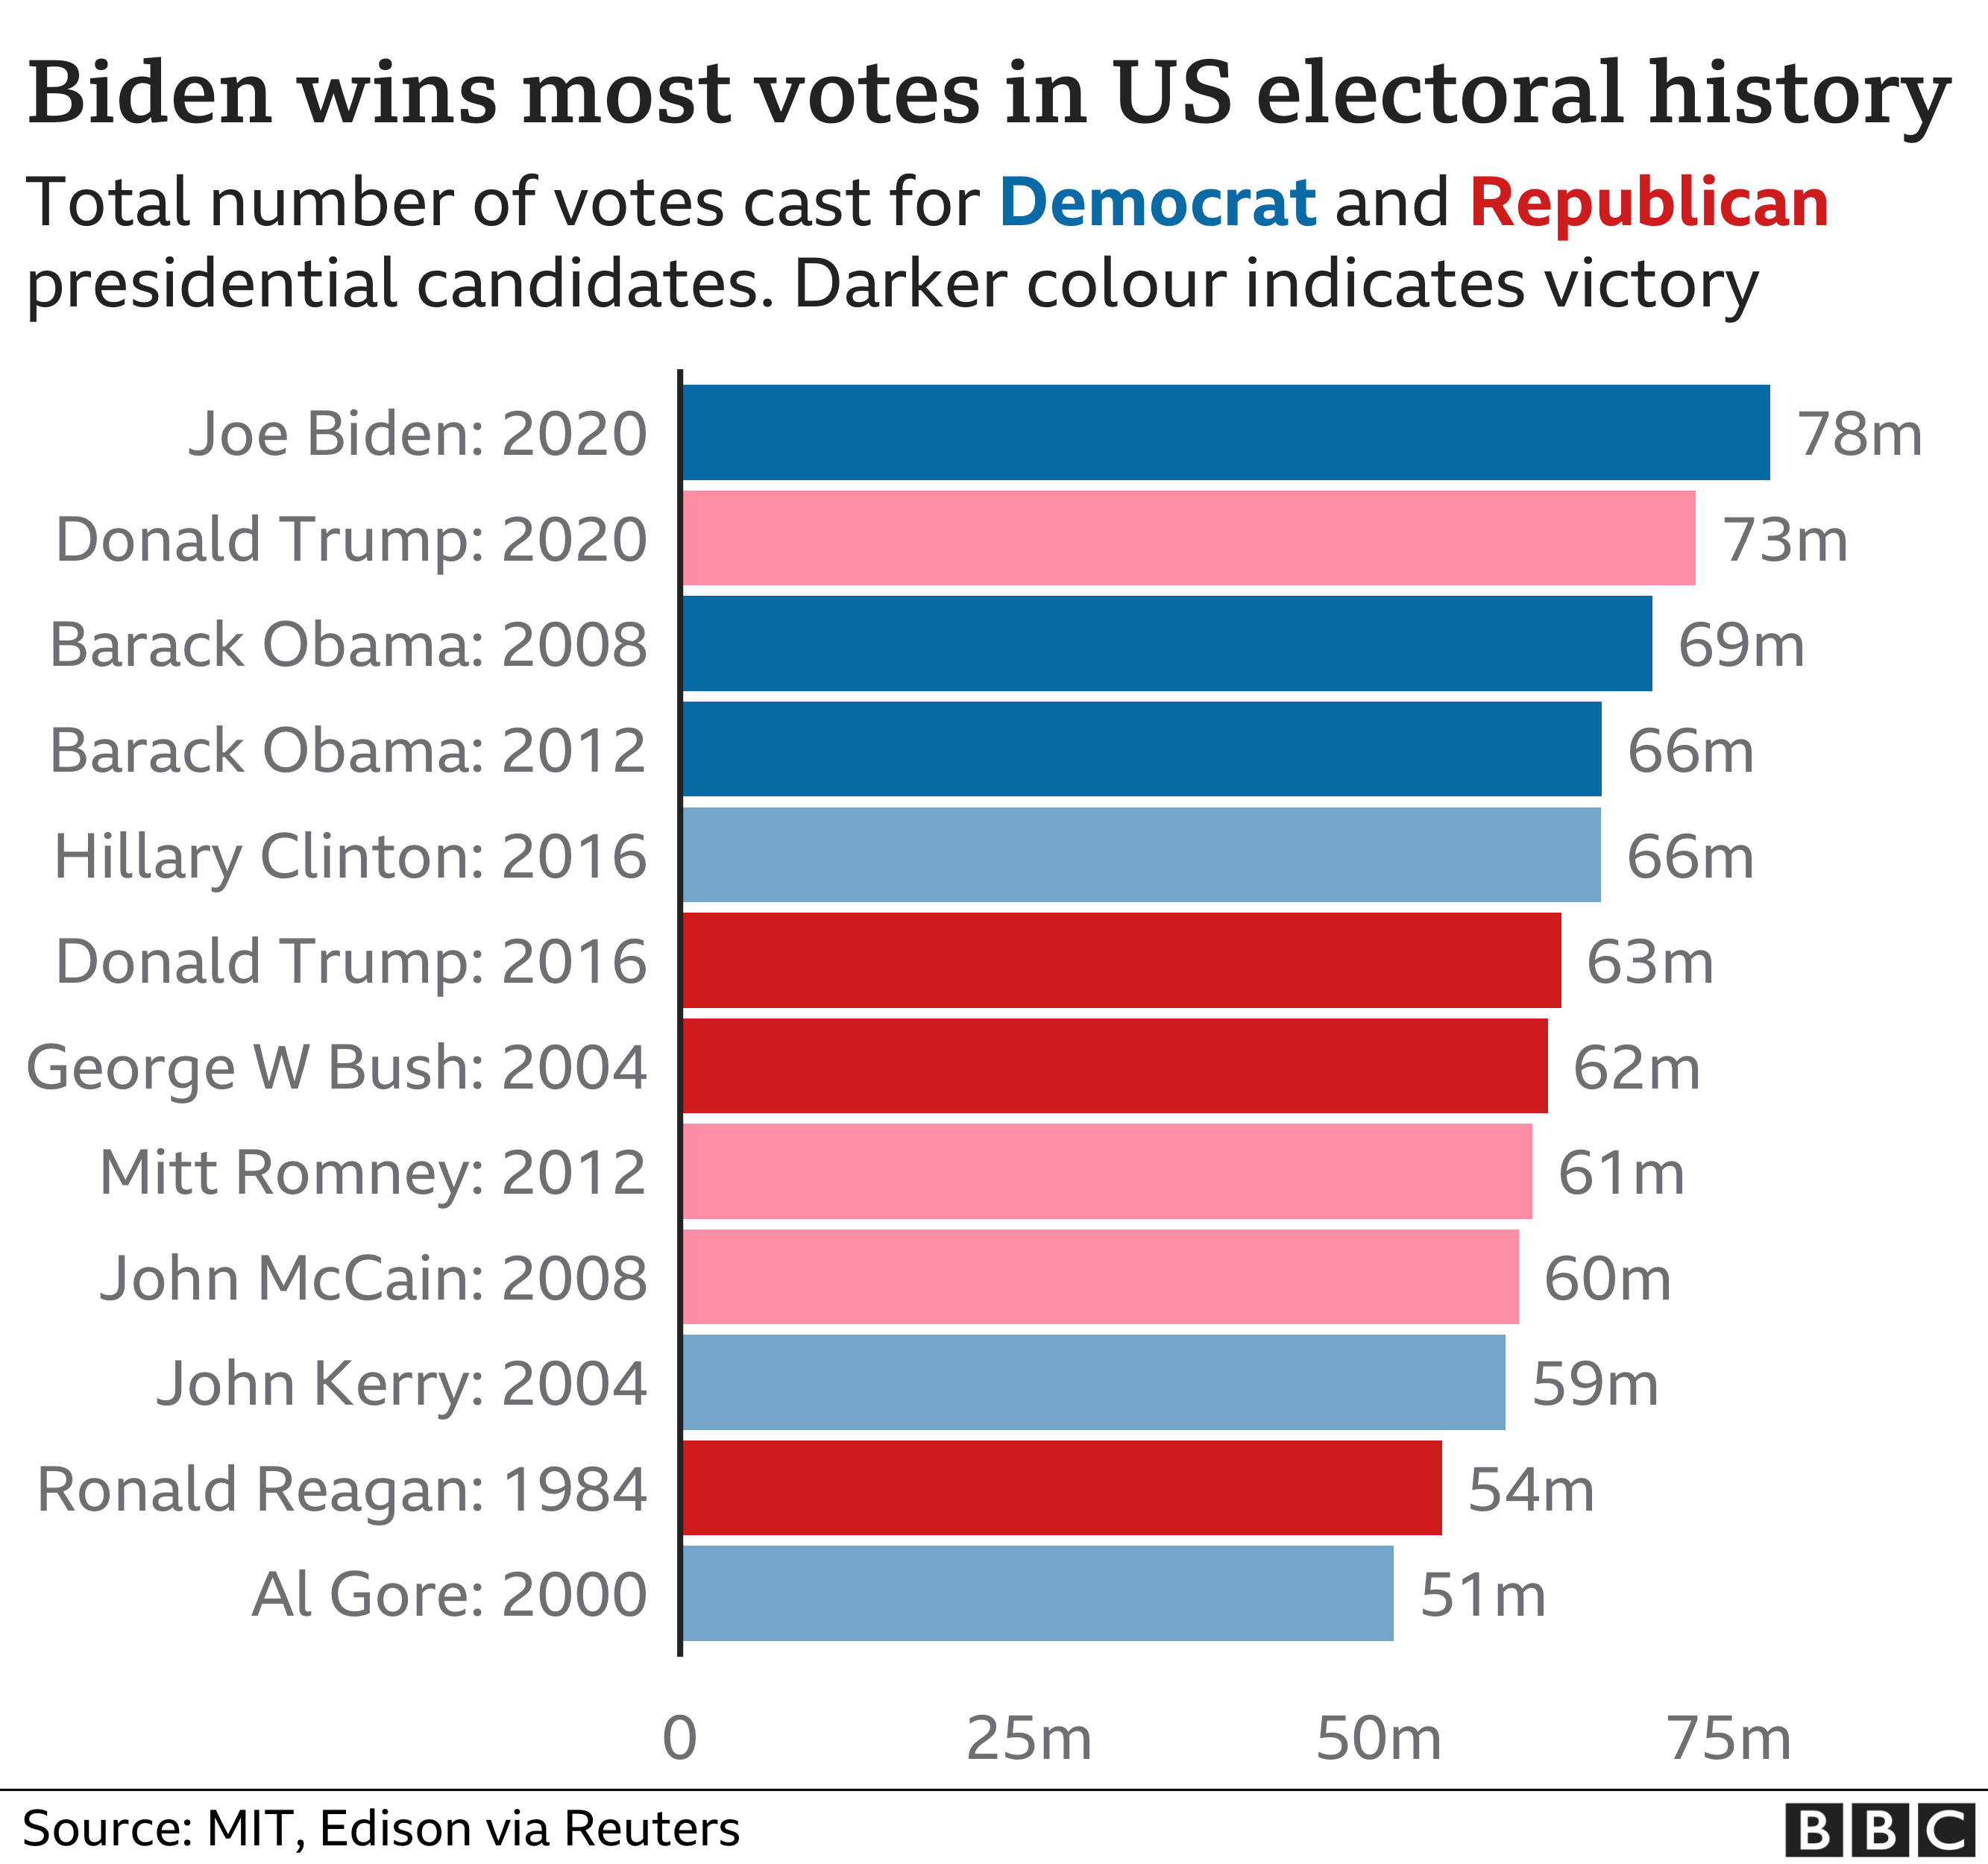 Chart showing presidential candidates with the most votes overall in US electoral history